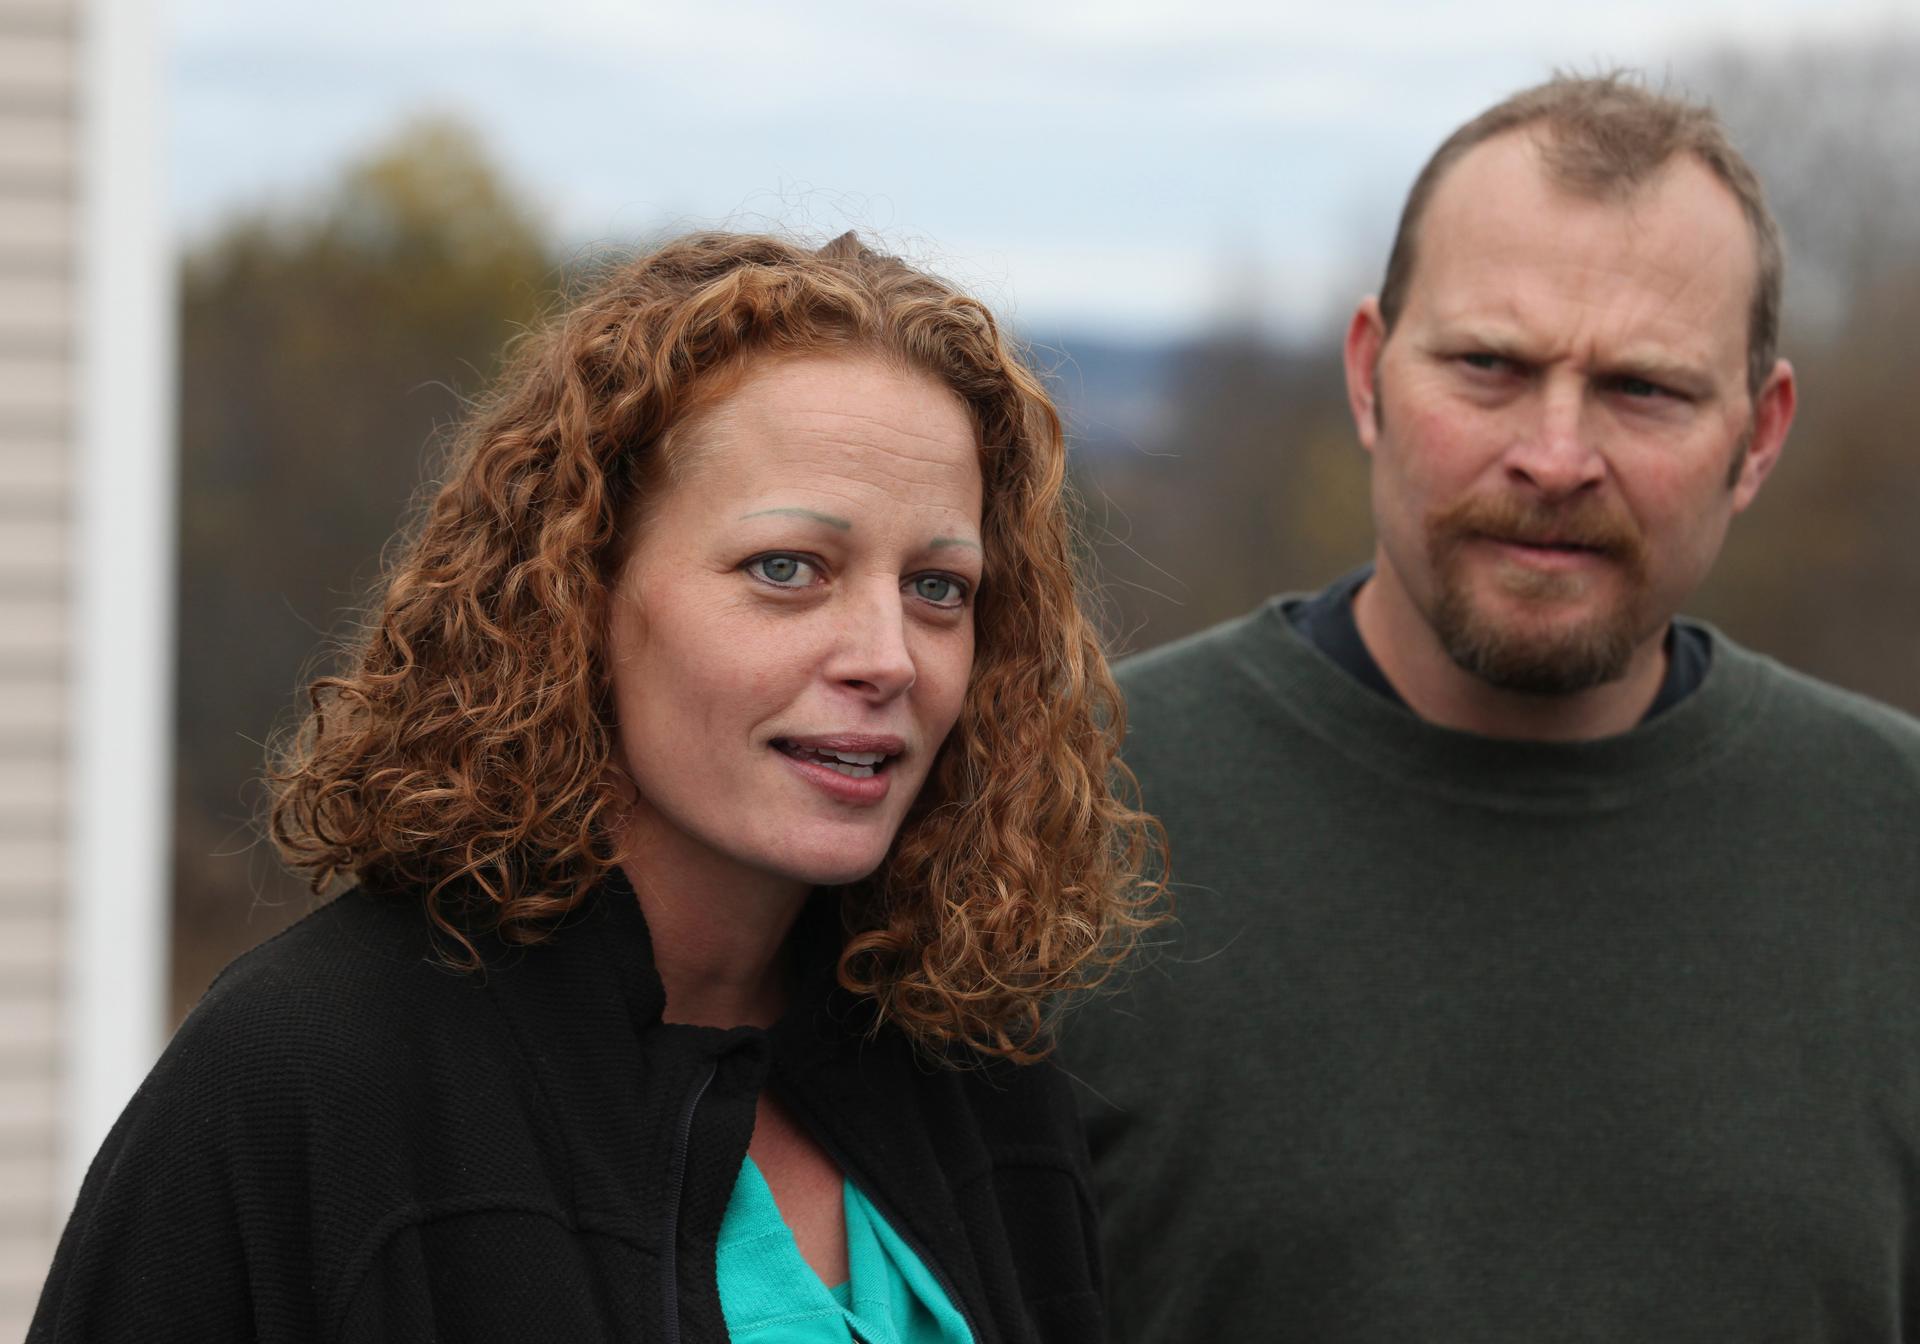 Nurse Kaci Hickox and her boyfriend, Ted Wilbur, speak with the media outside of their home in Fort Kent, Maine, on October 31, 2014. Hickox defied quarantine orders in New Jersey and Maine after returning from West Africa but testing negative for Ebola.